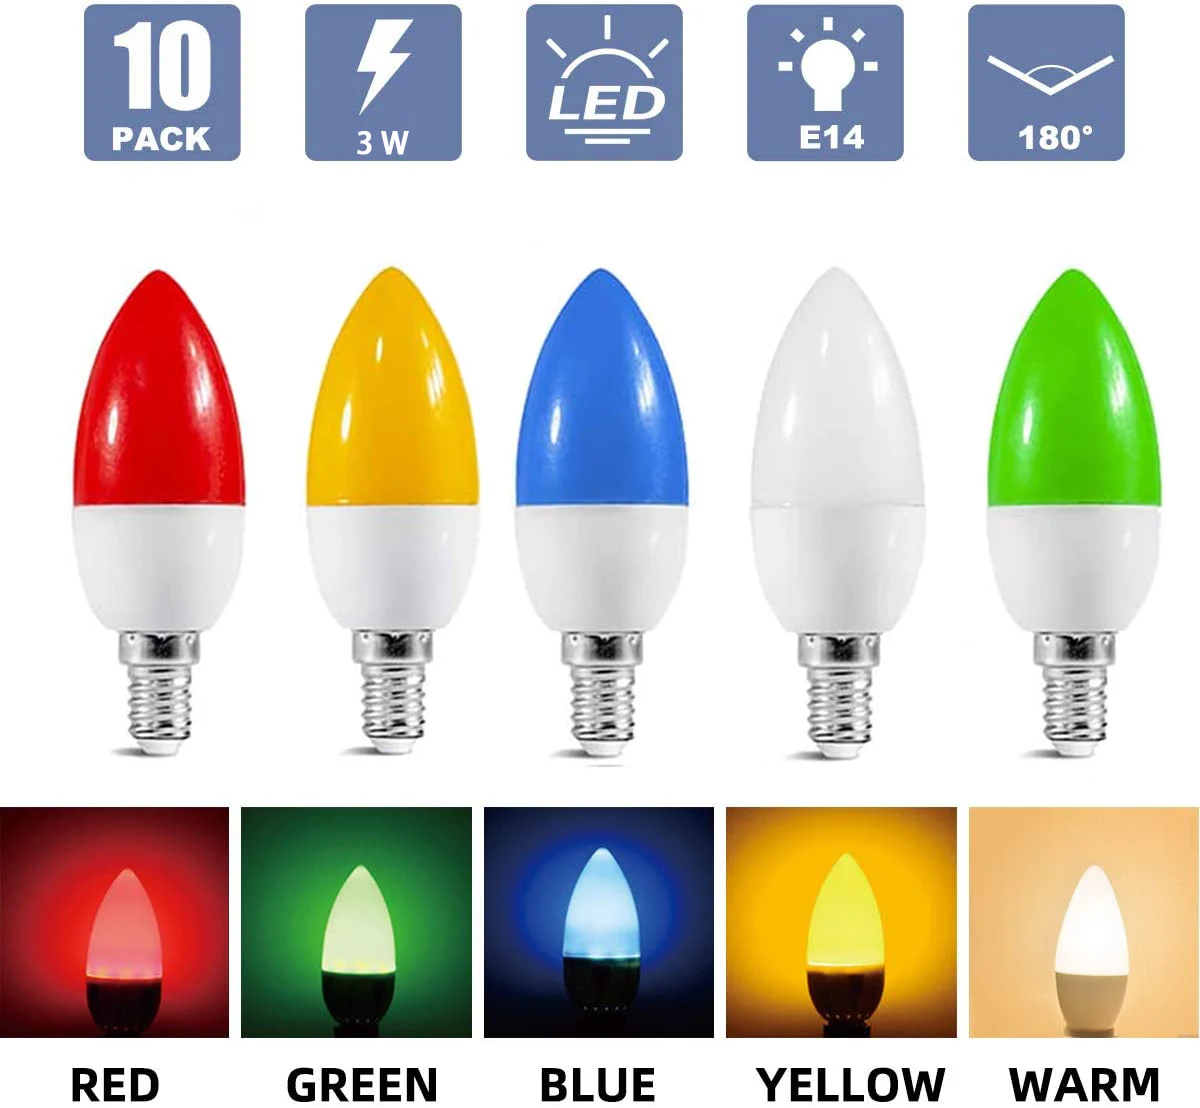 2x 3W LED Coloured SES E14 Candle Light Bulb Lamp Red Yellow Green Blue 85-265V 